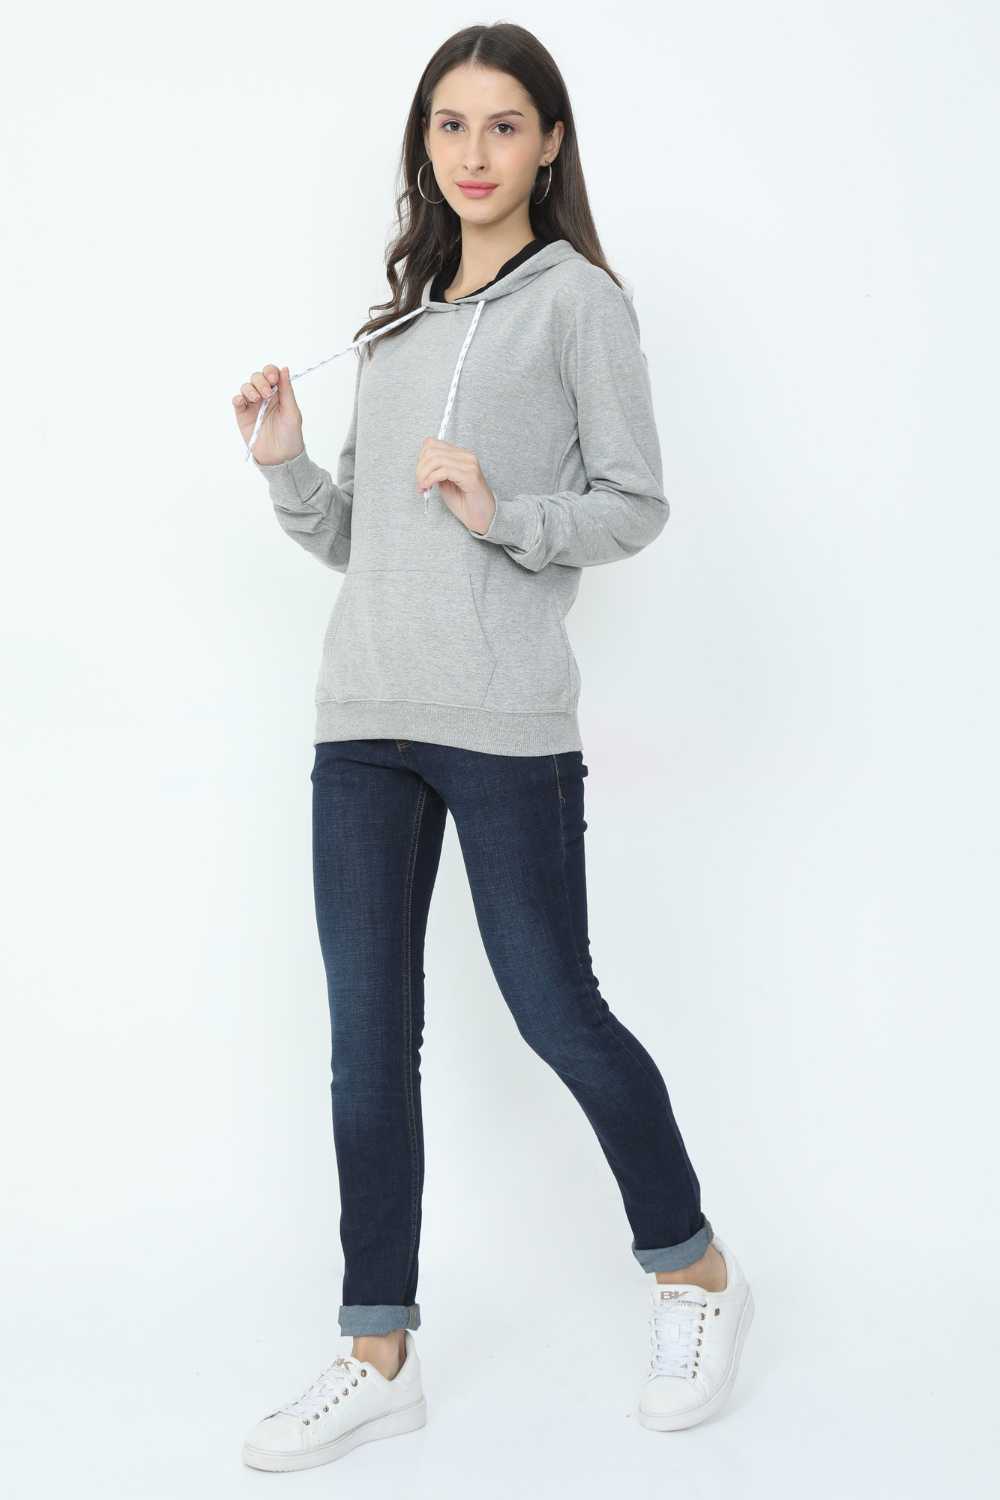 HOODIE for Women In Grey | sandgrouse